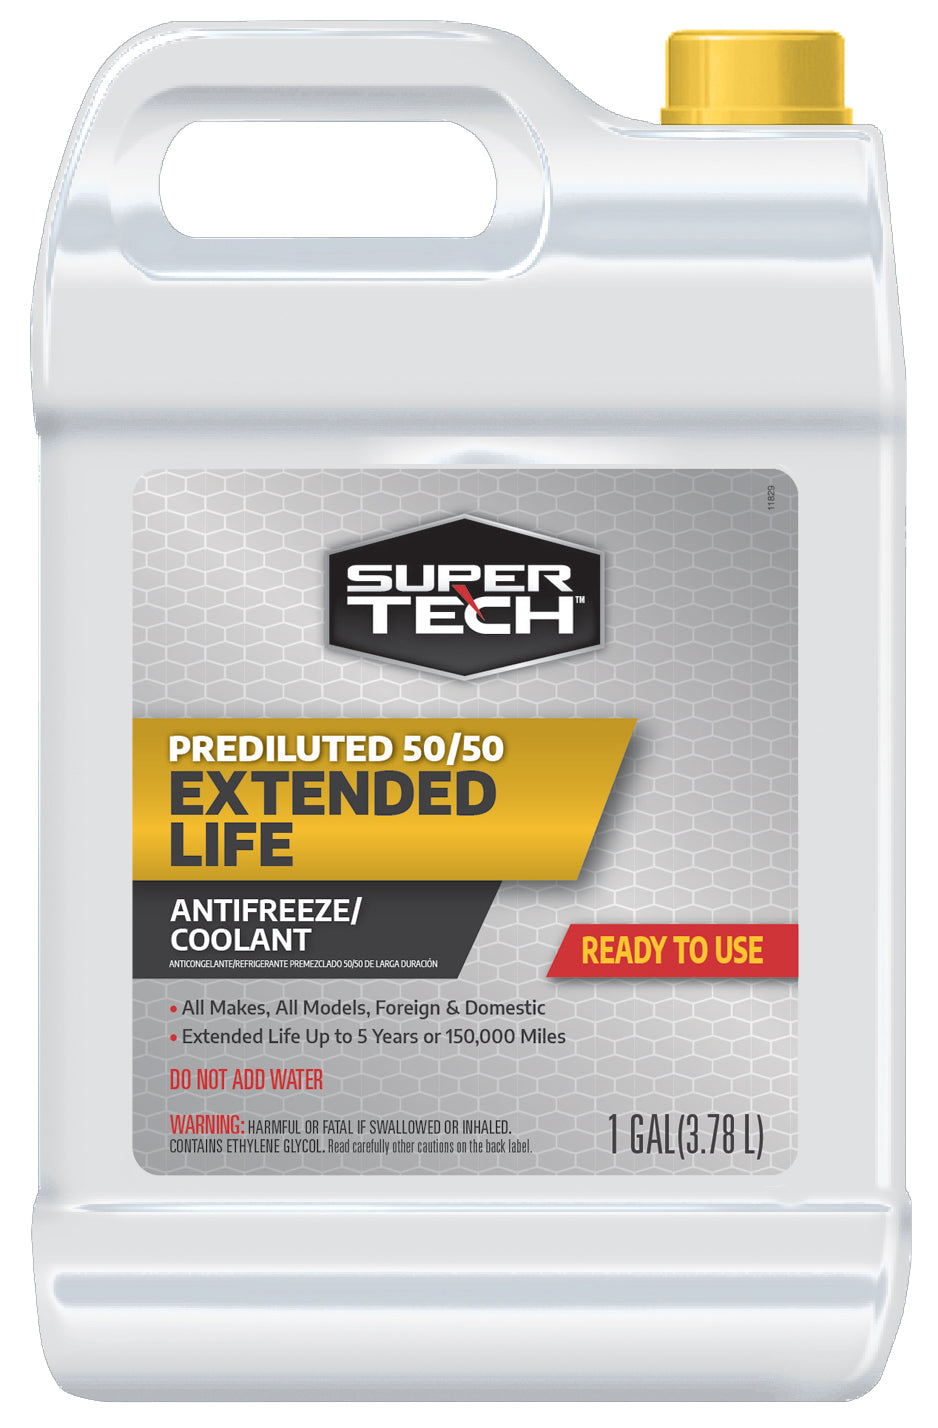 SuperTech Prediluted 50/50 Extended Life Antifreeze/Coolant, 1 Gal